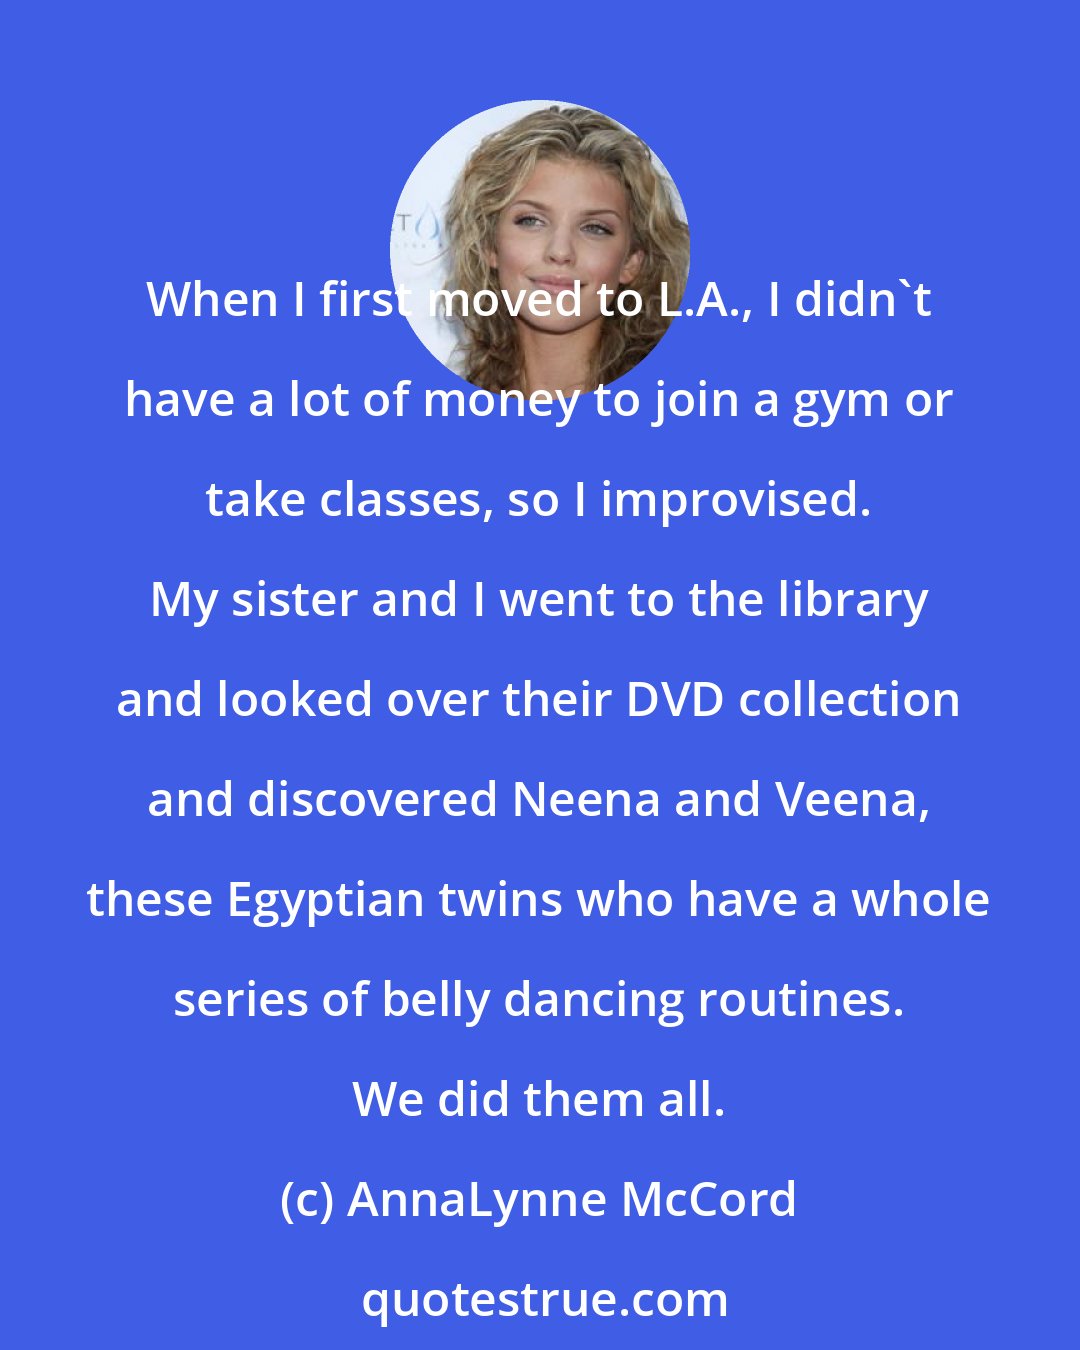 AnnaLynne McCord: When I first moved to L.A., I didn't have a lot of money to join a gym or take classes, so I improvised. My sister and I went to the library and looked over their DVD collection and discovered Neena and Veena, these Egyptian twins who have a whole series of belly dancing routines. We did them all.